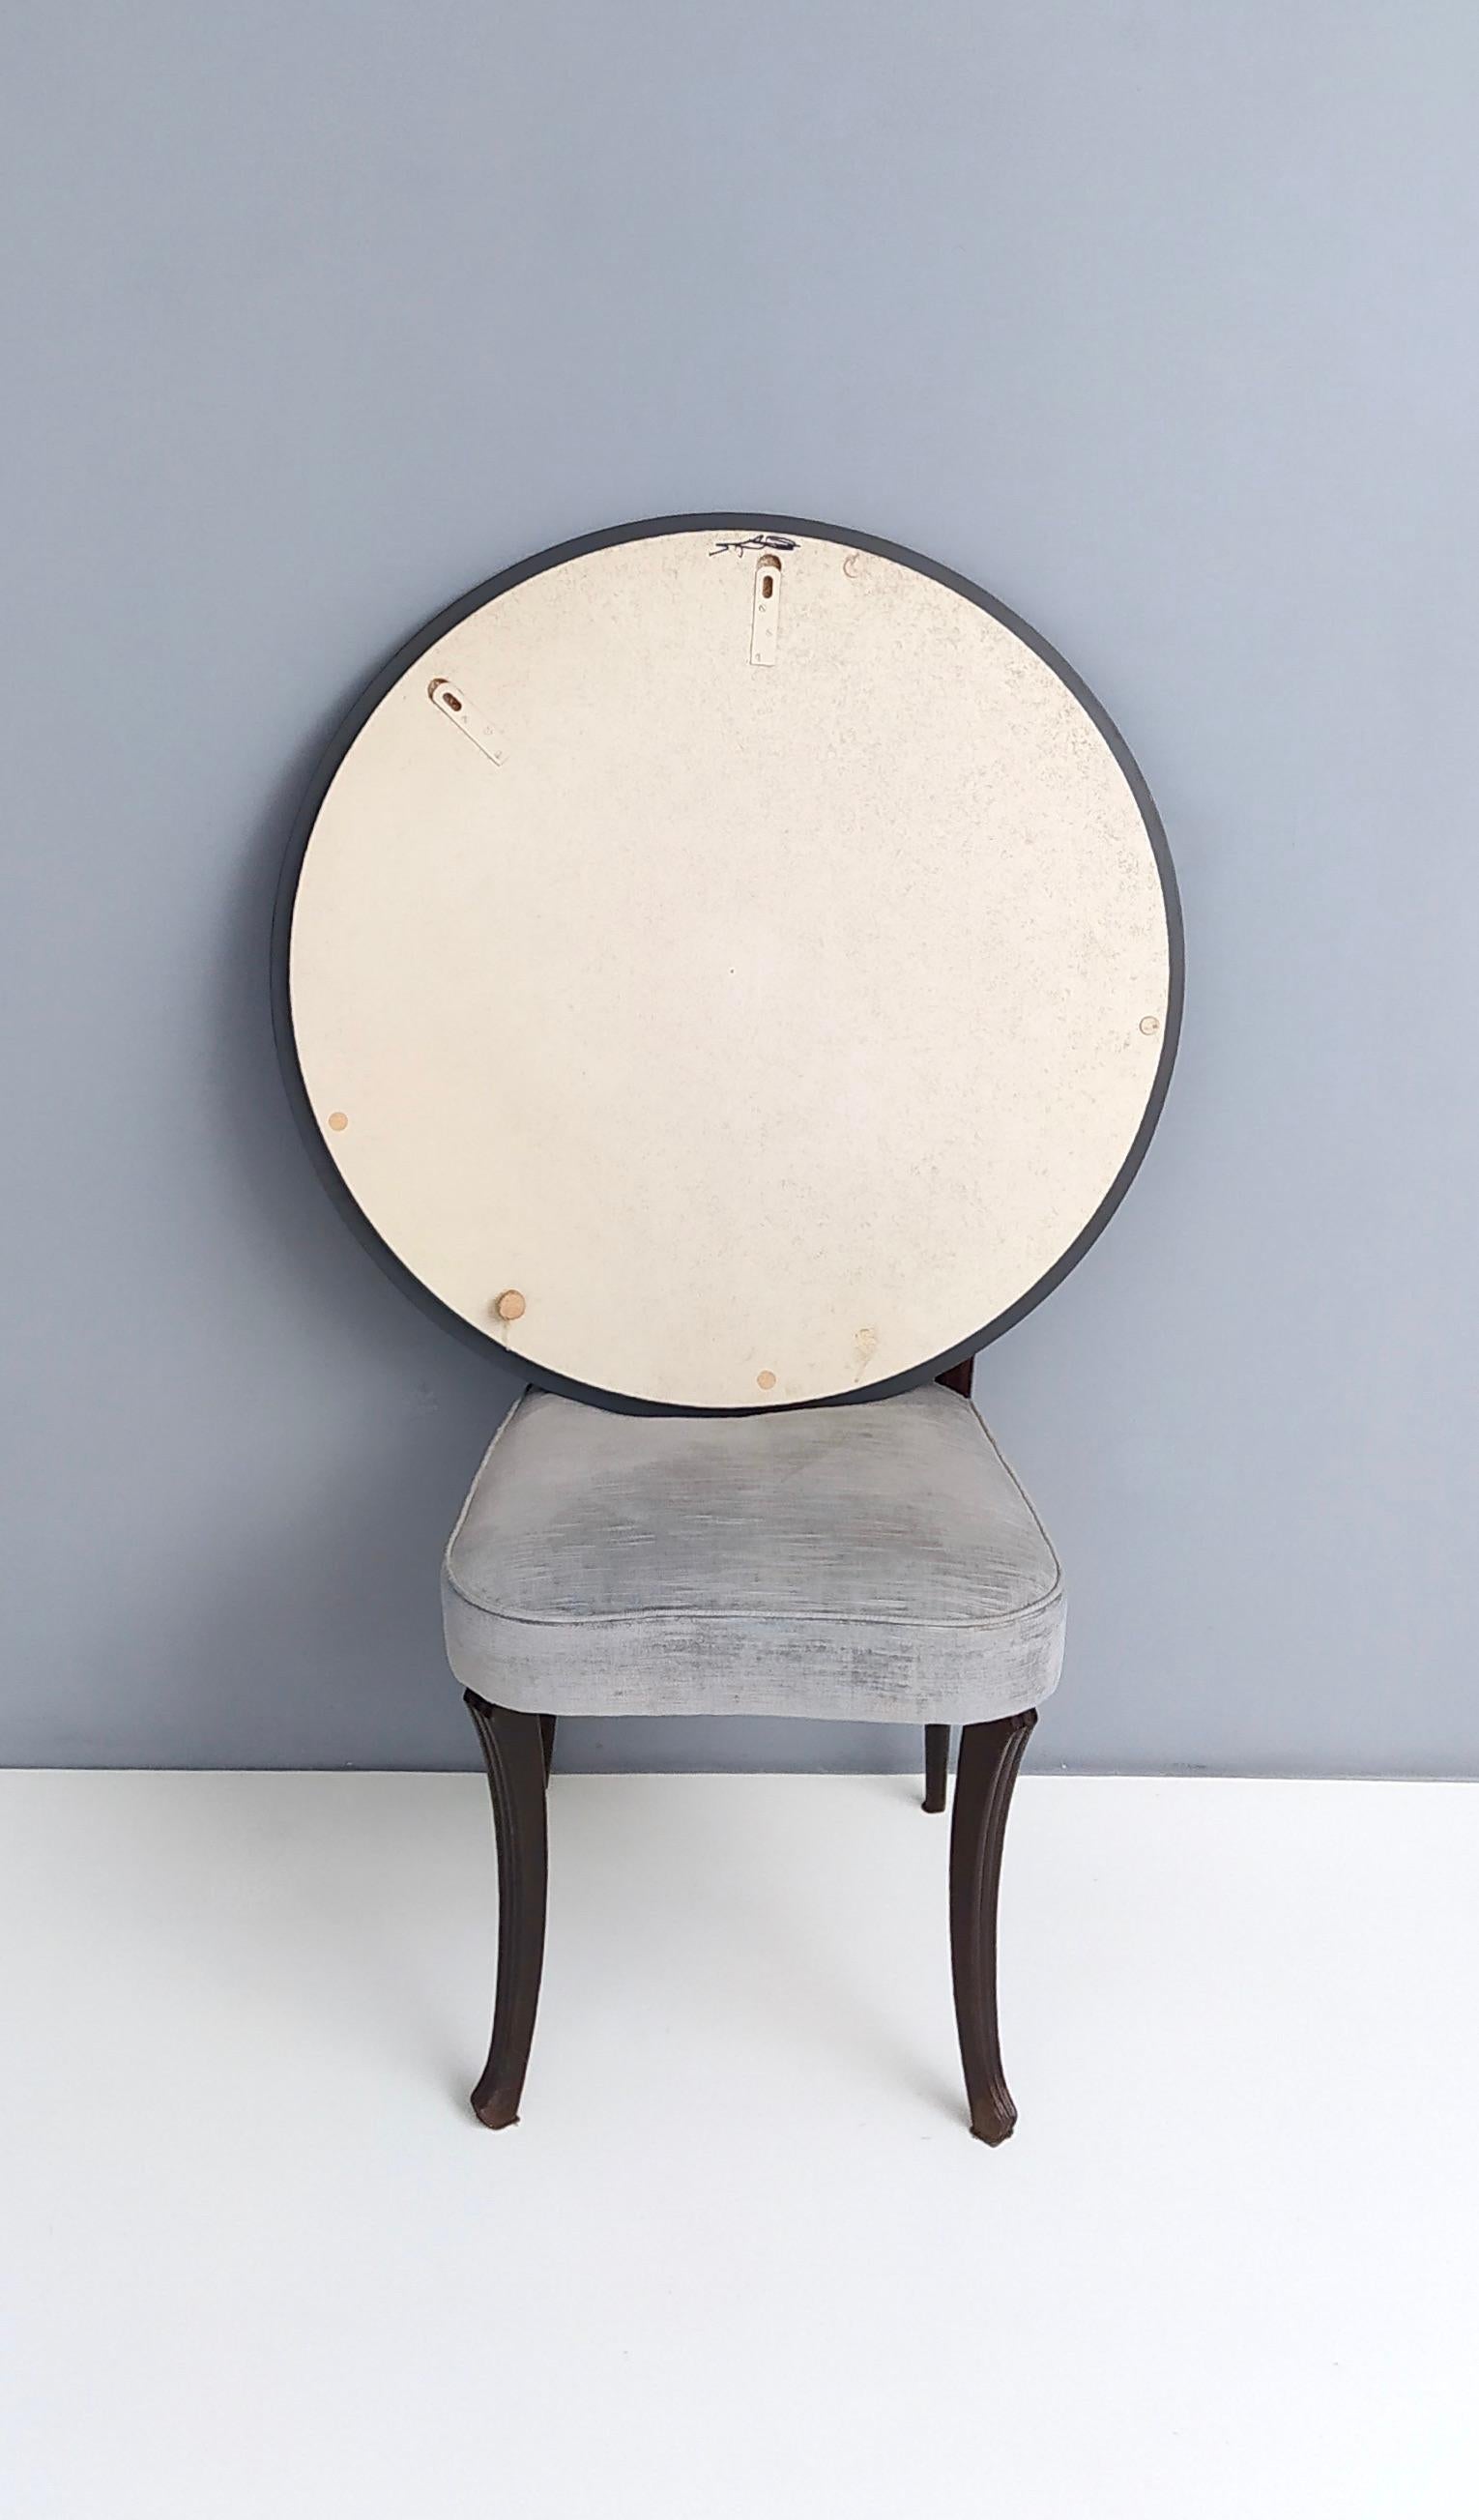 Late 20th Century VIntage Round Wall Mirror by Rimadesio with a Bronze and Old Rose Mirrored Frame